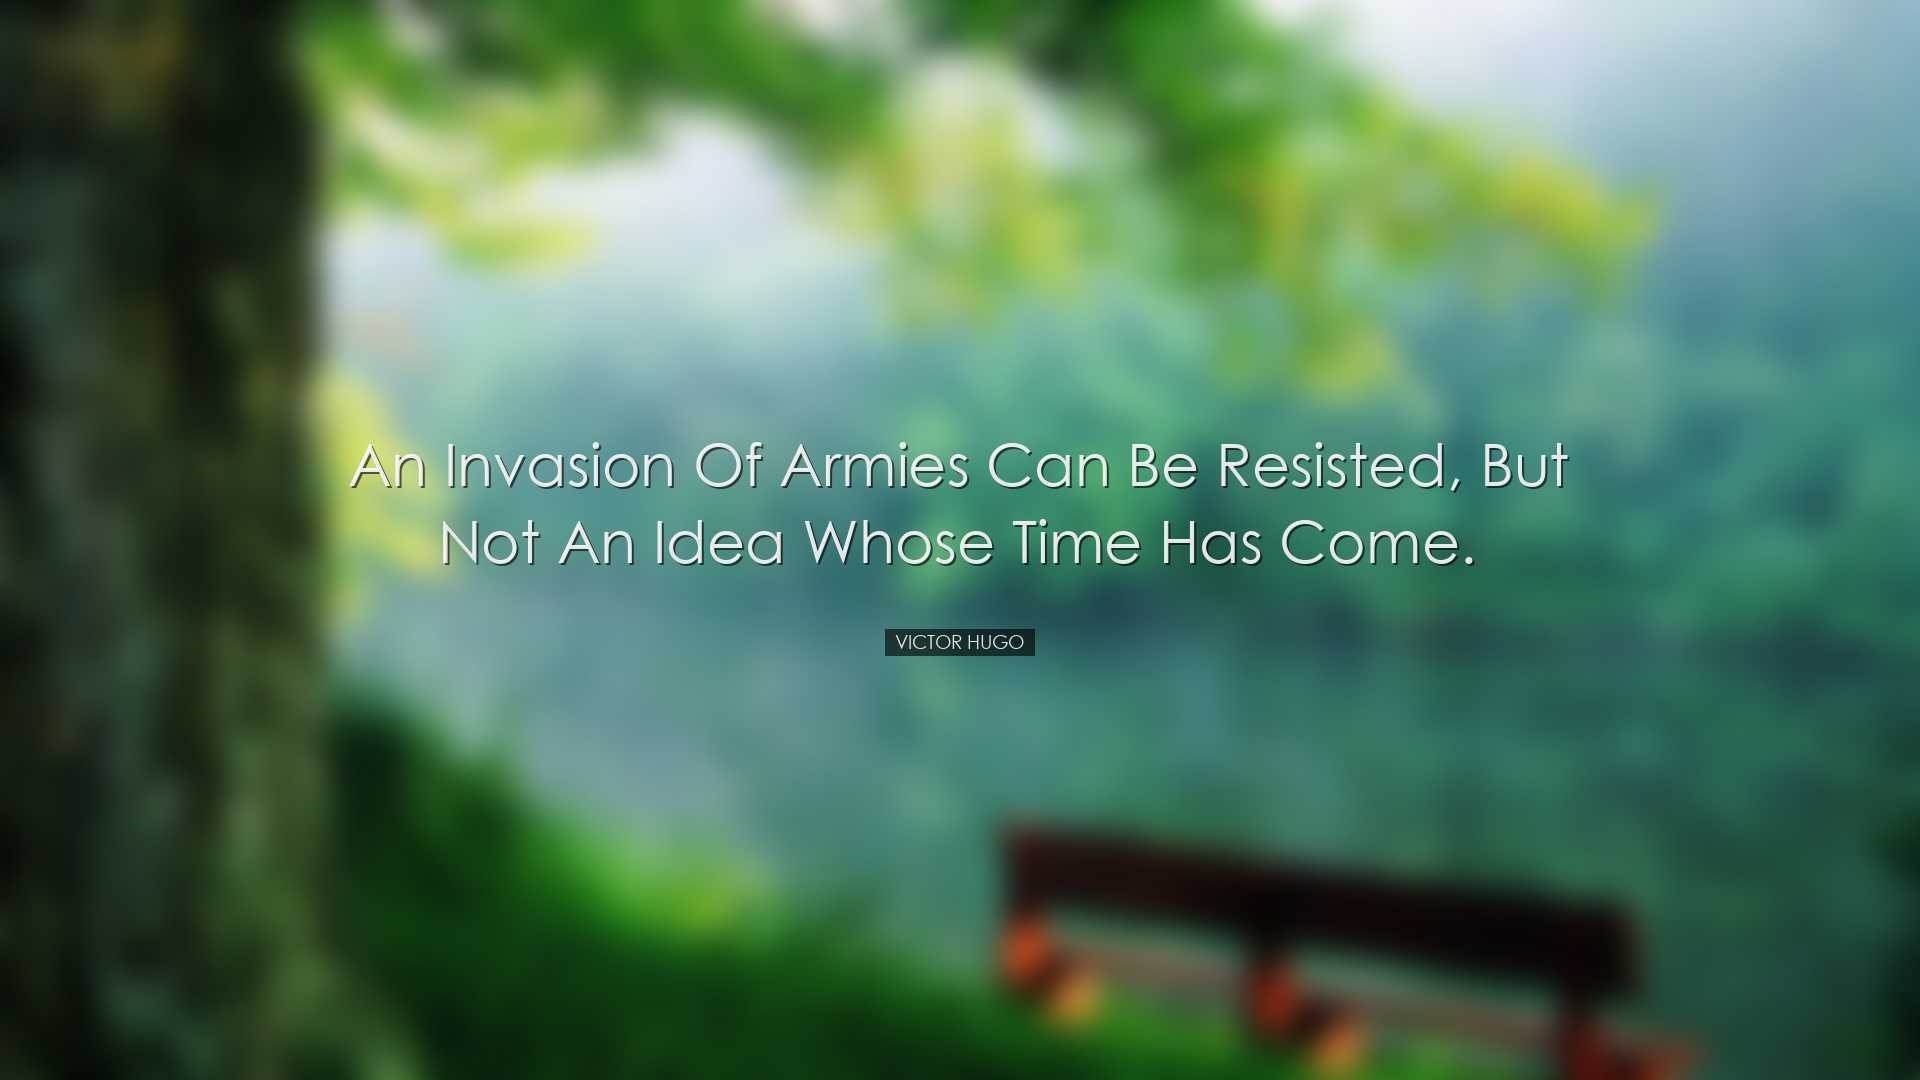 An invasion of armies can be resisted, but not an idea whose time